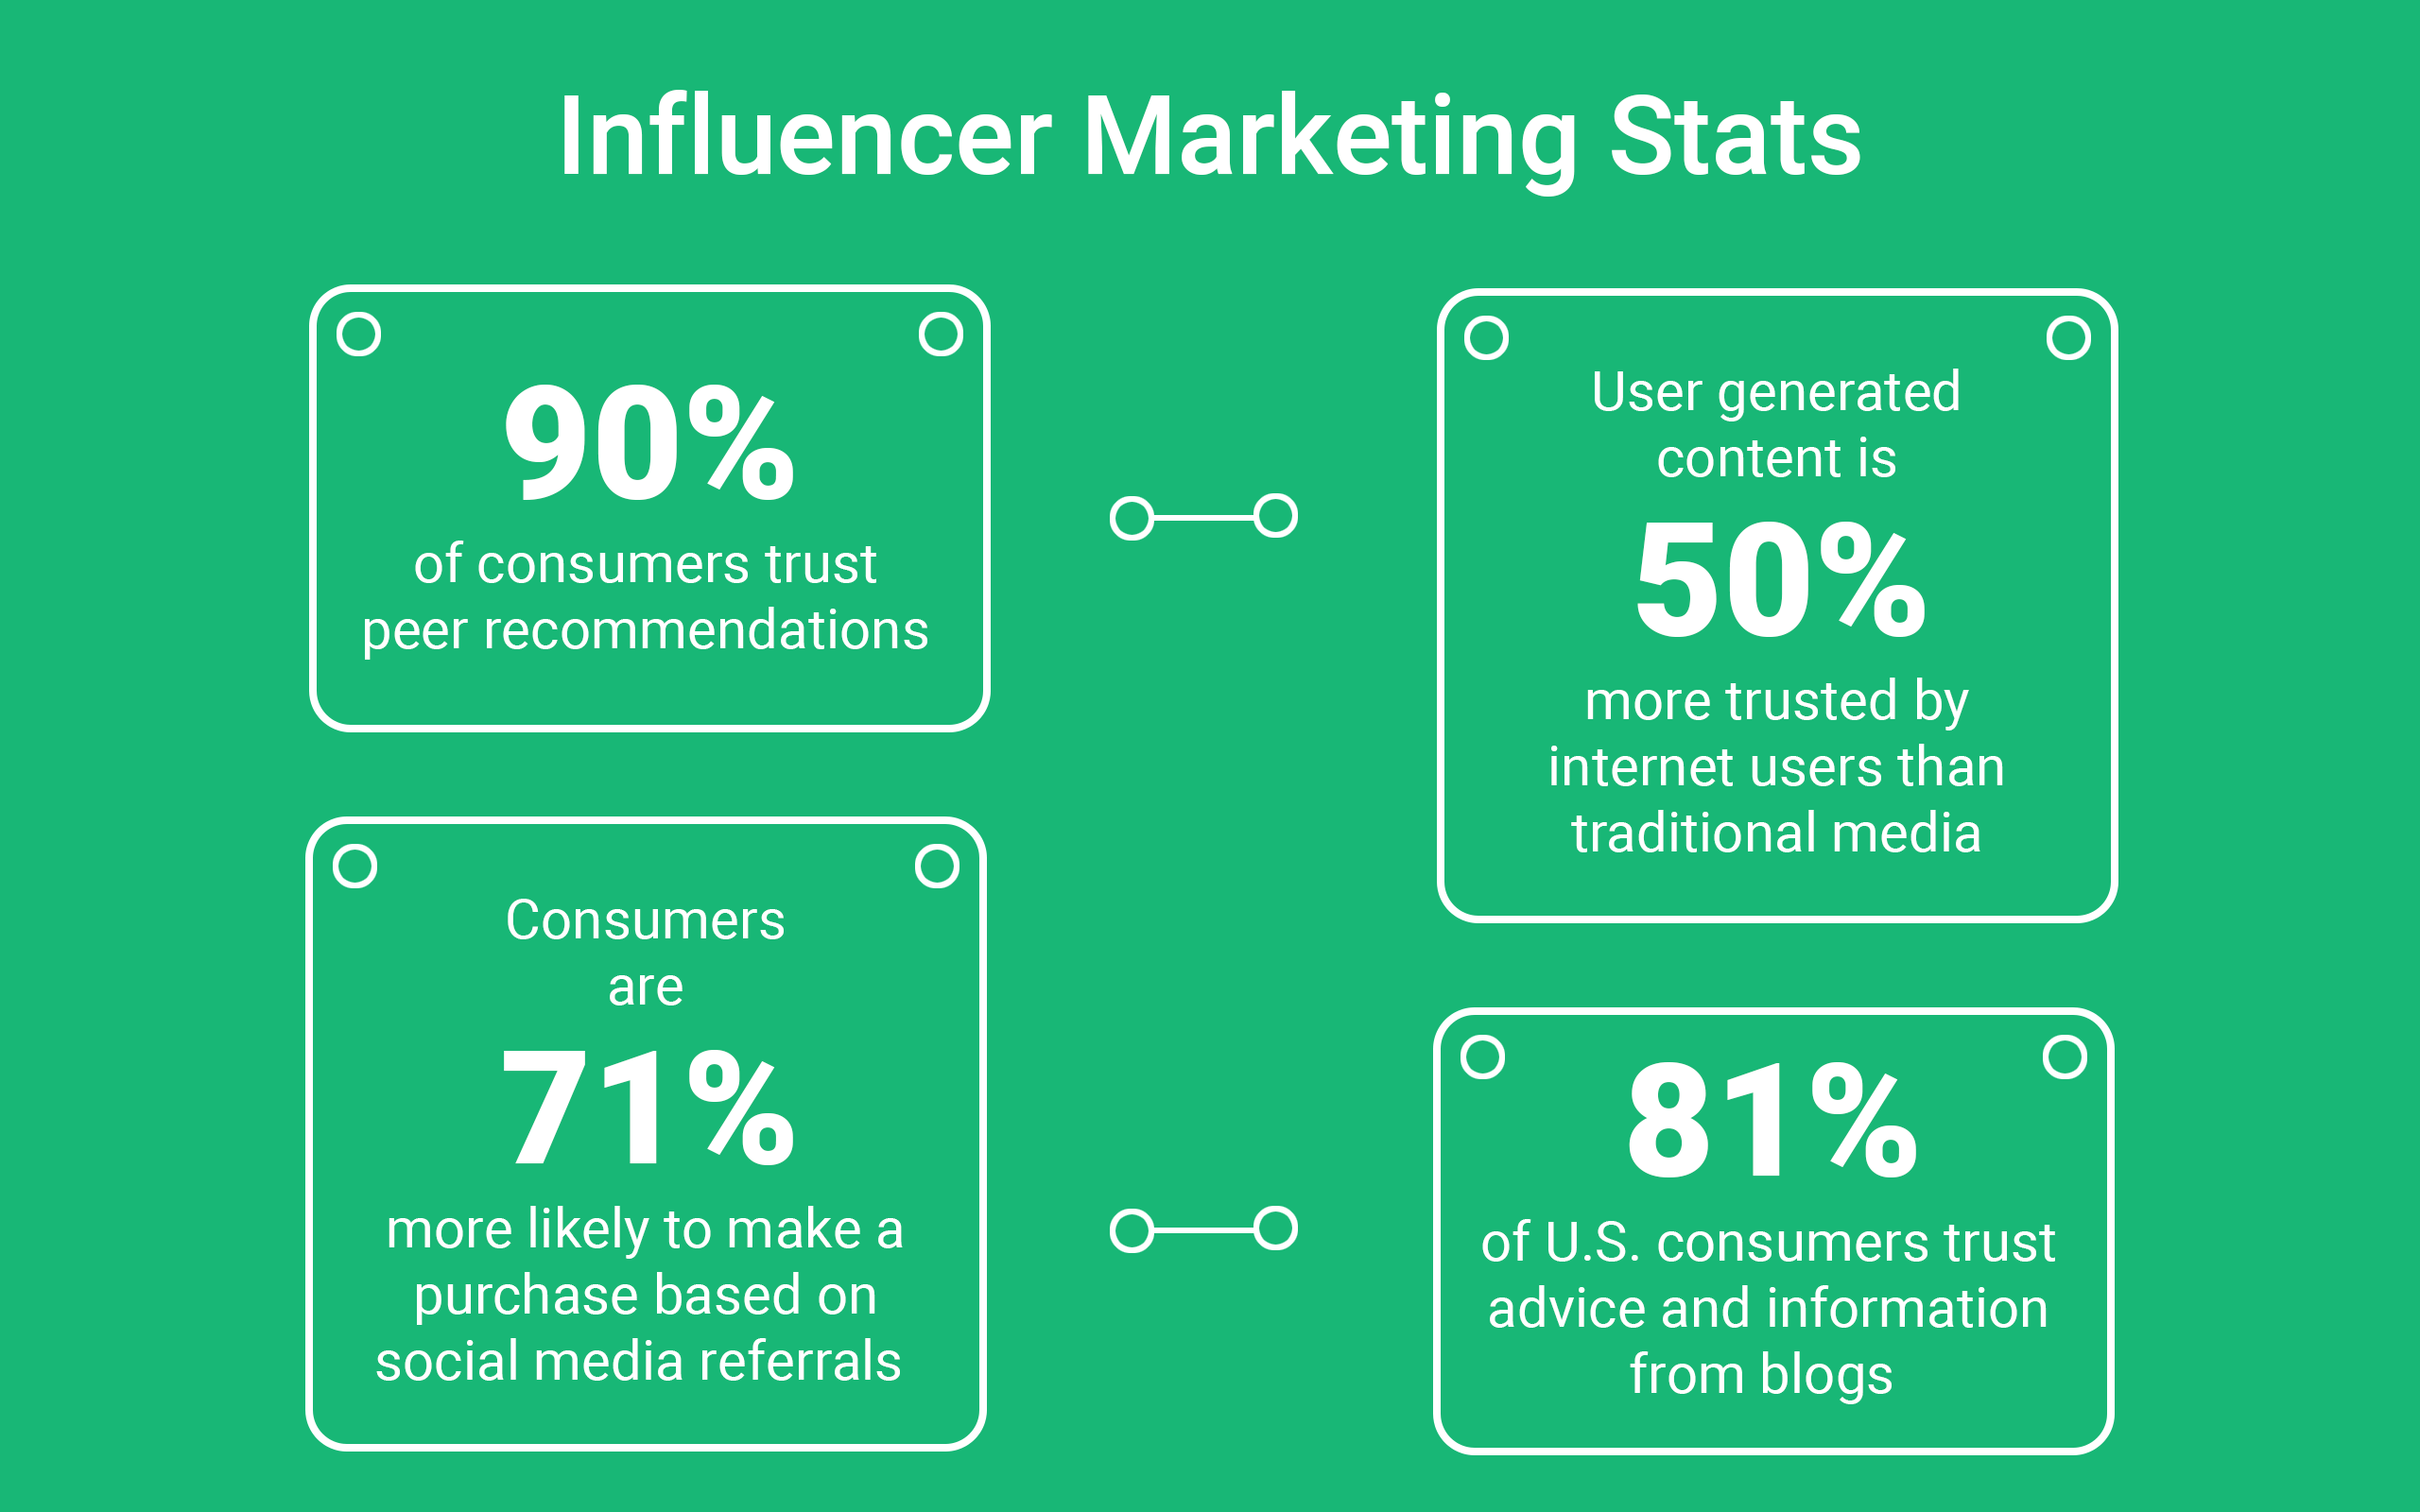 research on influencers